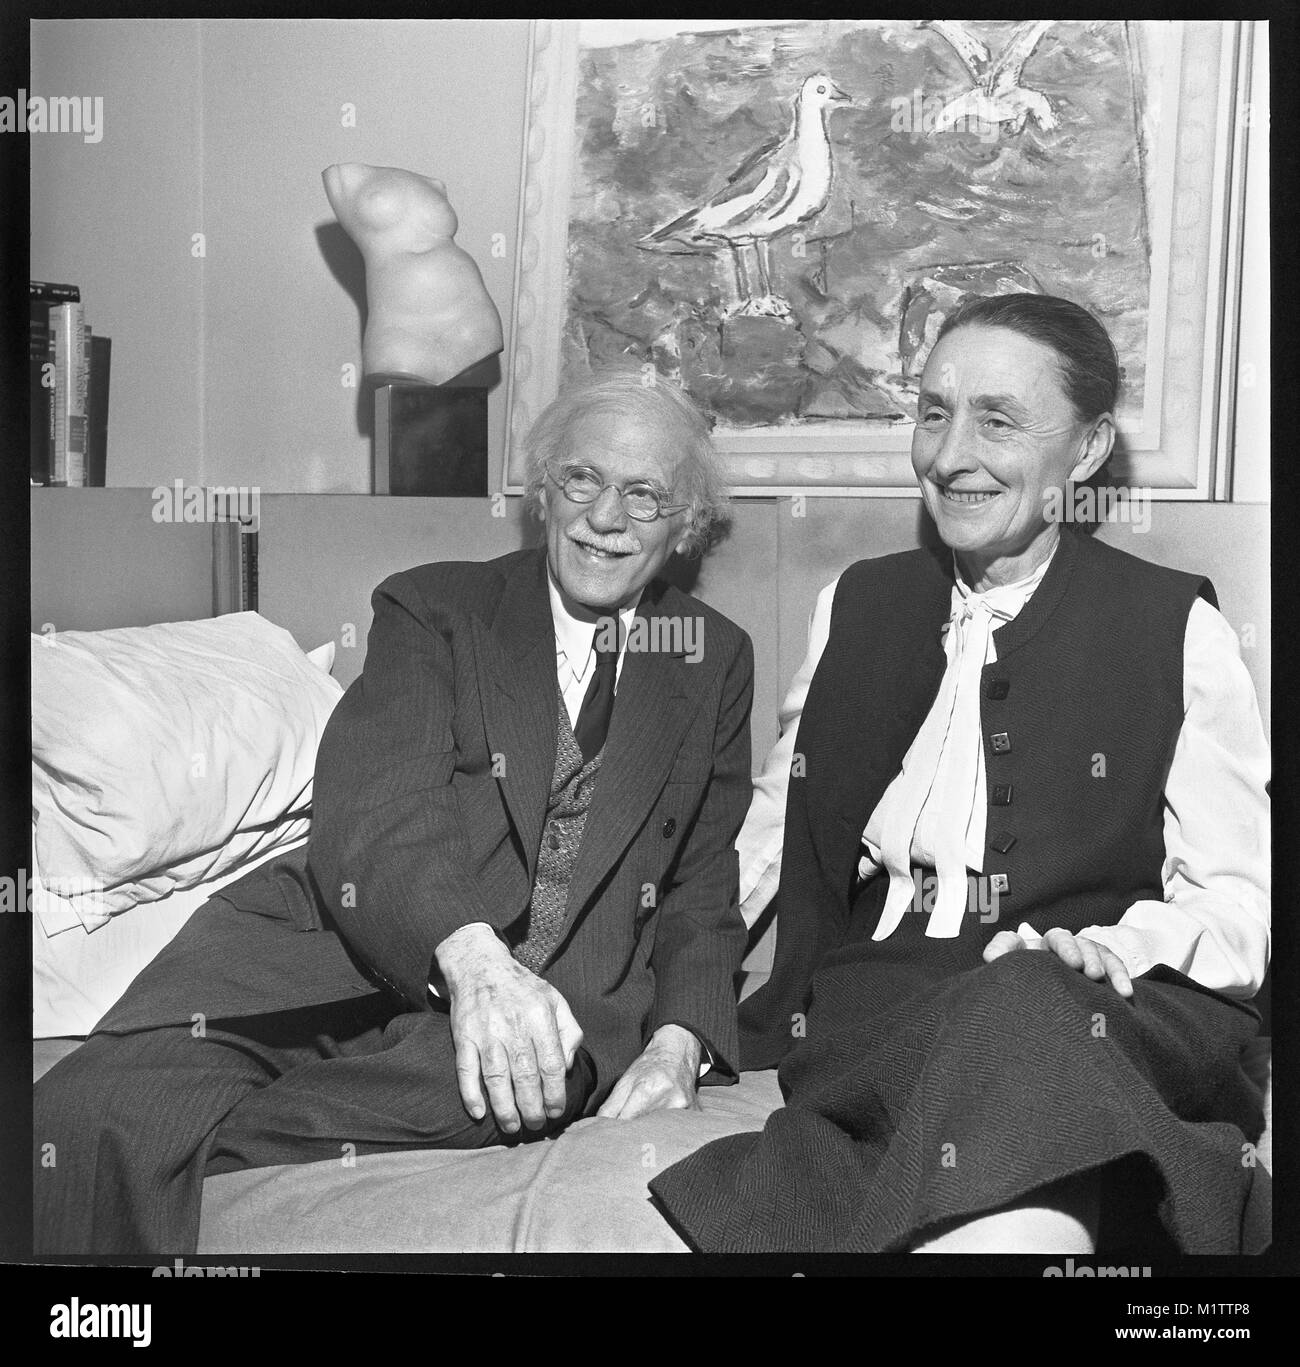 Photographer Alfred Stieglitz and artist Georgia O’Keeffe in New York City. The married couple are at 'An American Place' for an exhibition of John Marin in 1942. Artwork on wall is “Sea and Gulls” by Marin. Stock Photo